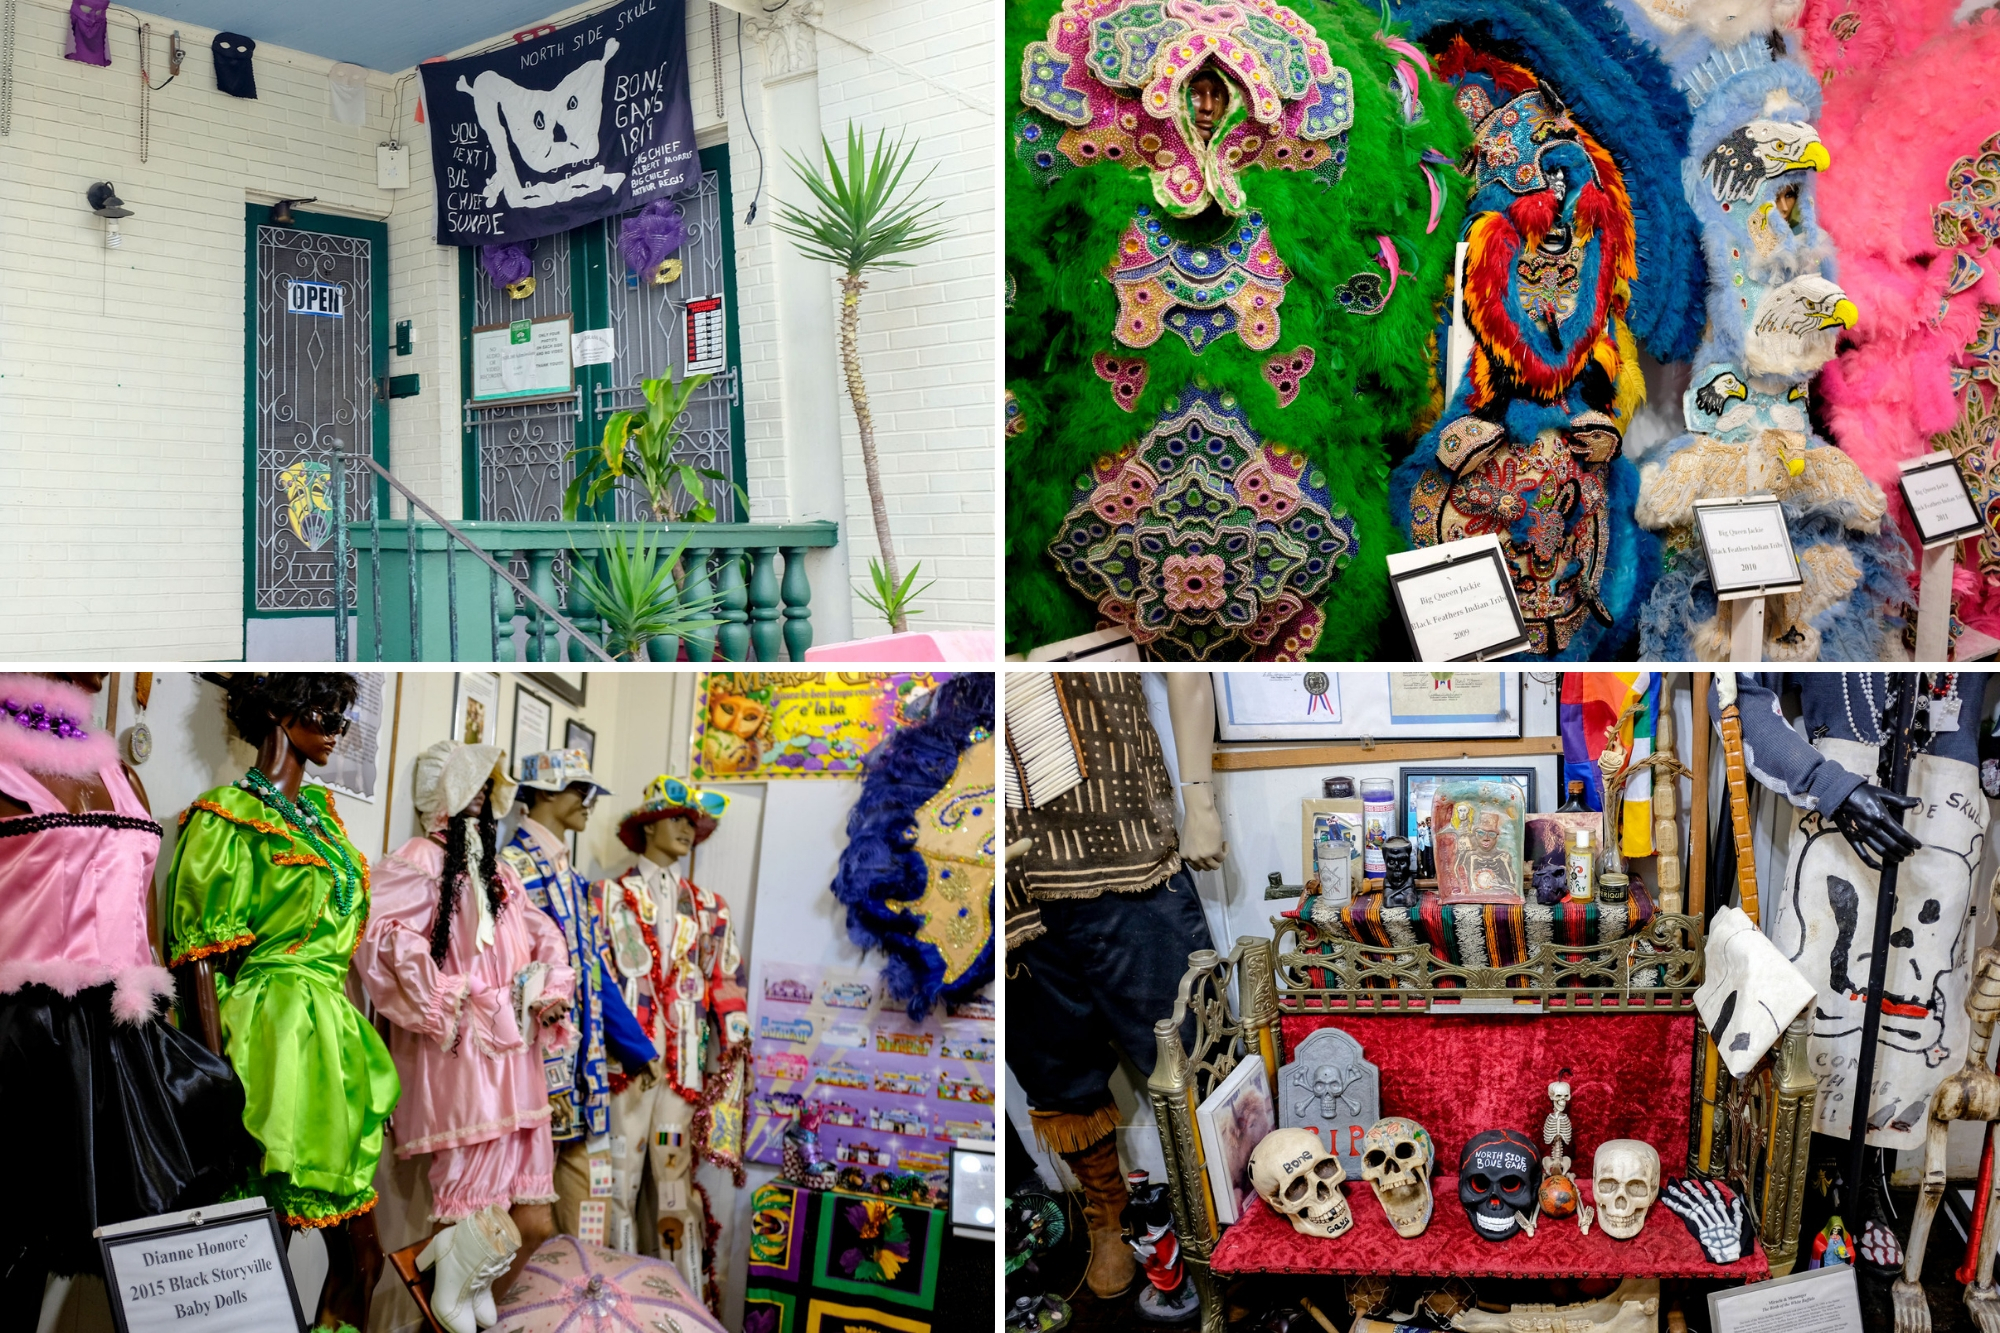 Collage: Mardi Gras Indian costumes, baby dolls, and jazz funerals